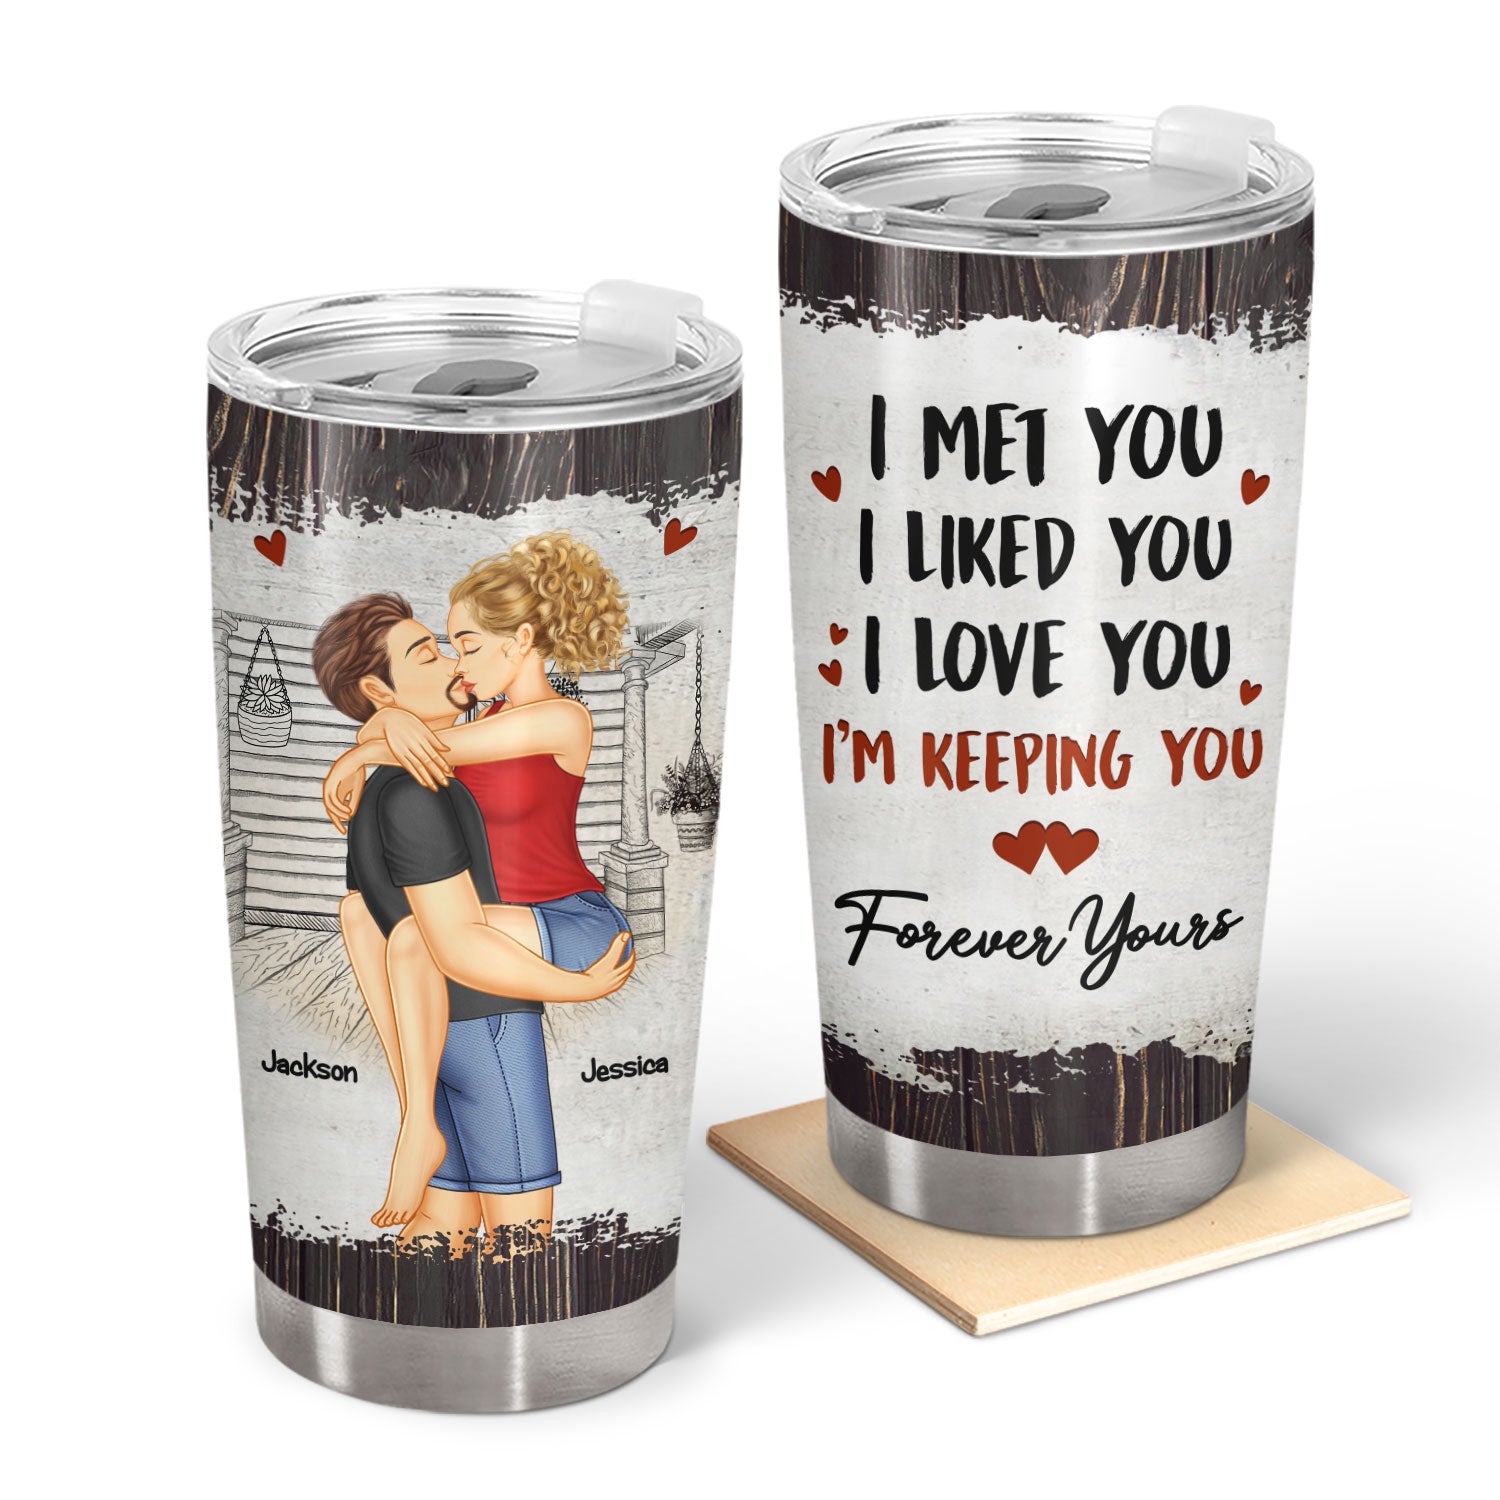 I Met You I Liked You I Love You Keeping You - Birthday, Loving, Anniversary Gift For Spouse, Hubby, Wifey, Boyfriend, Girlfriend, Couple - Personalized Tumbler